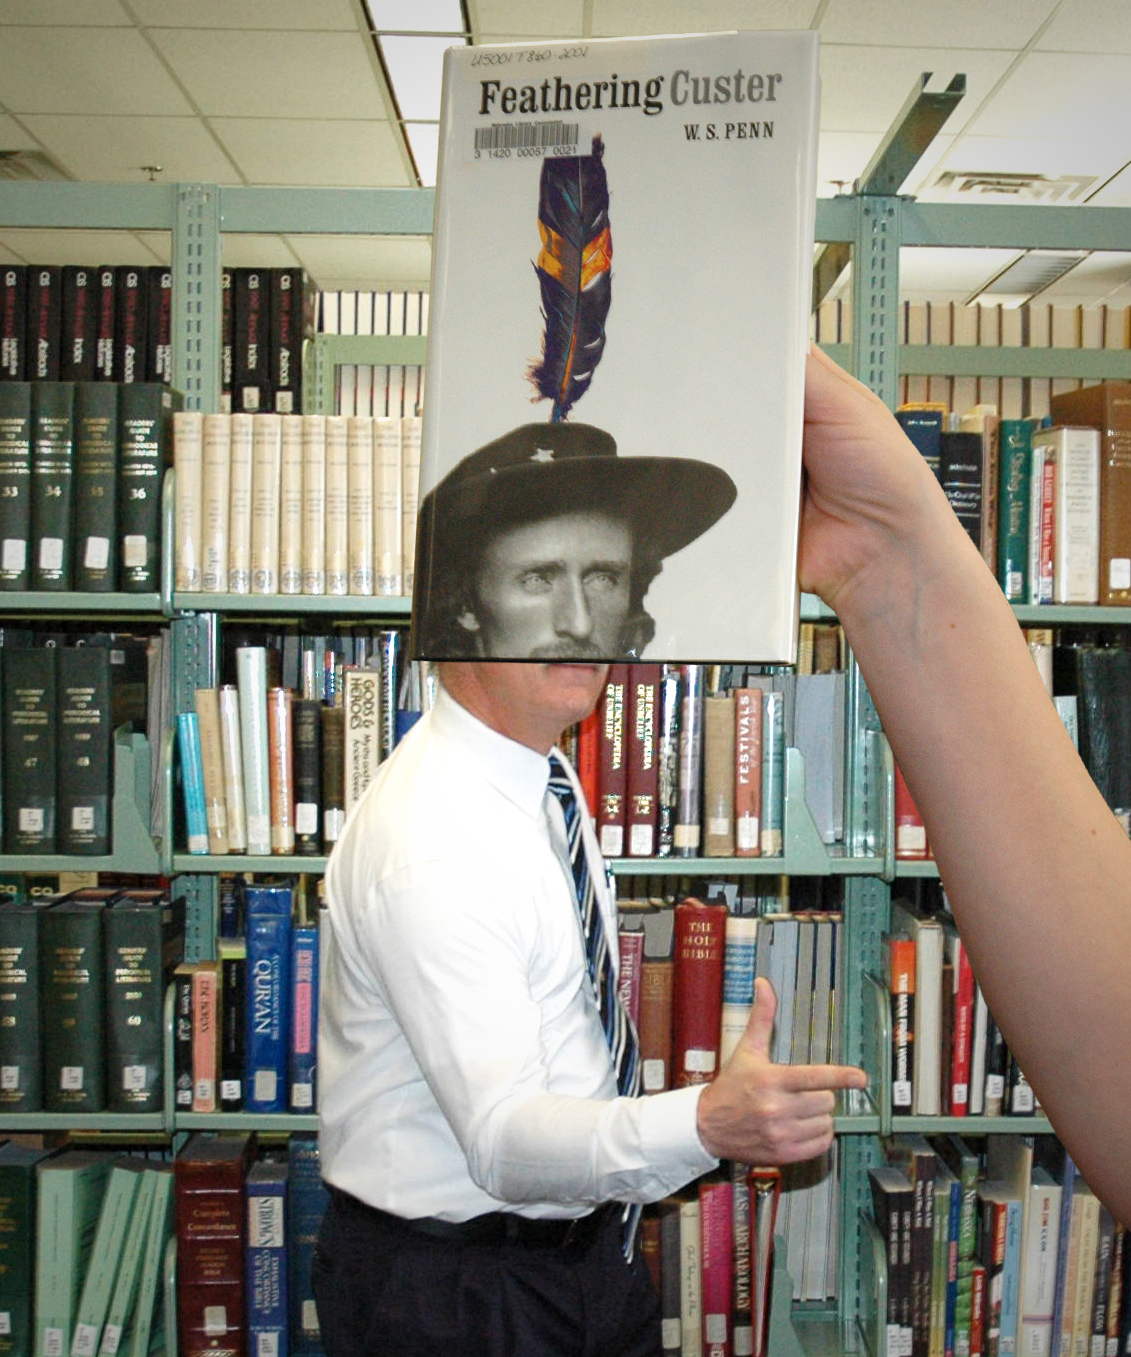 "Feathering Custer" BookFace